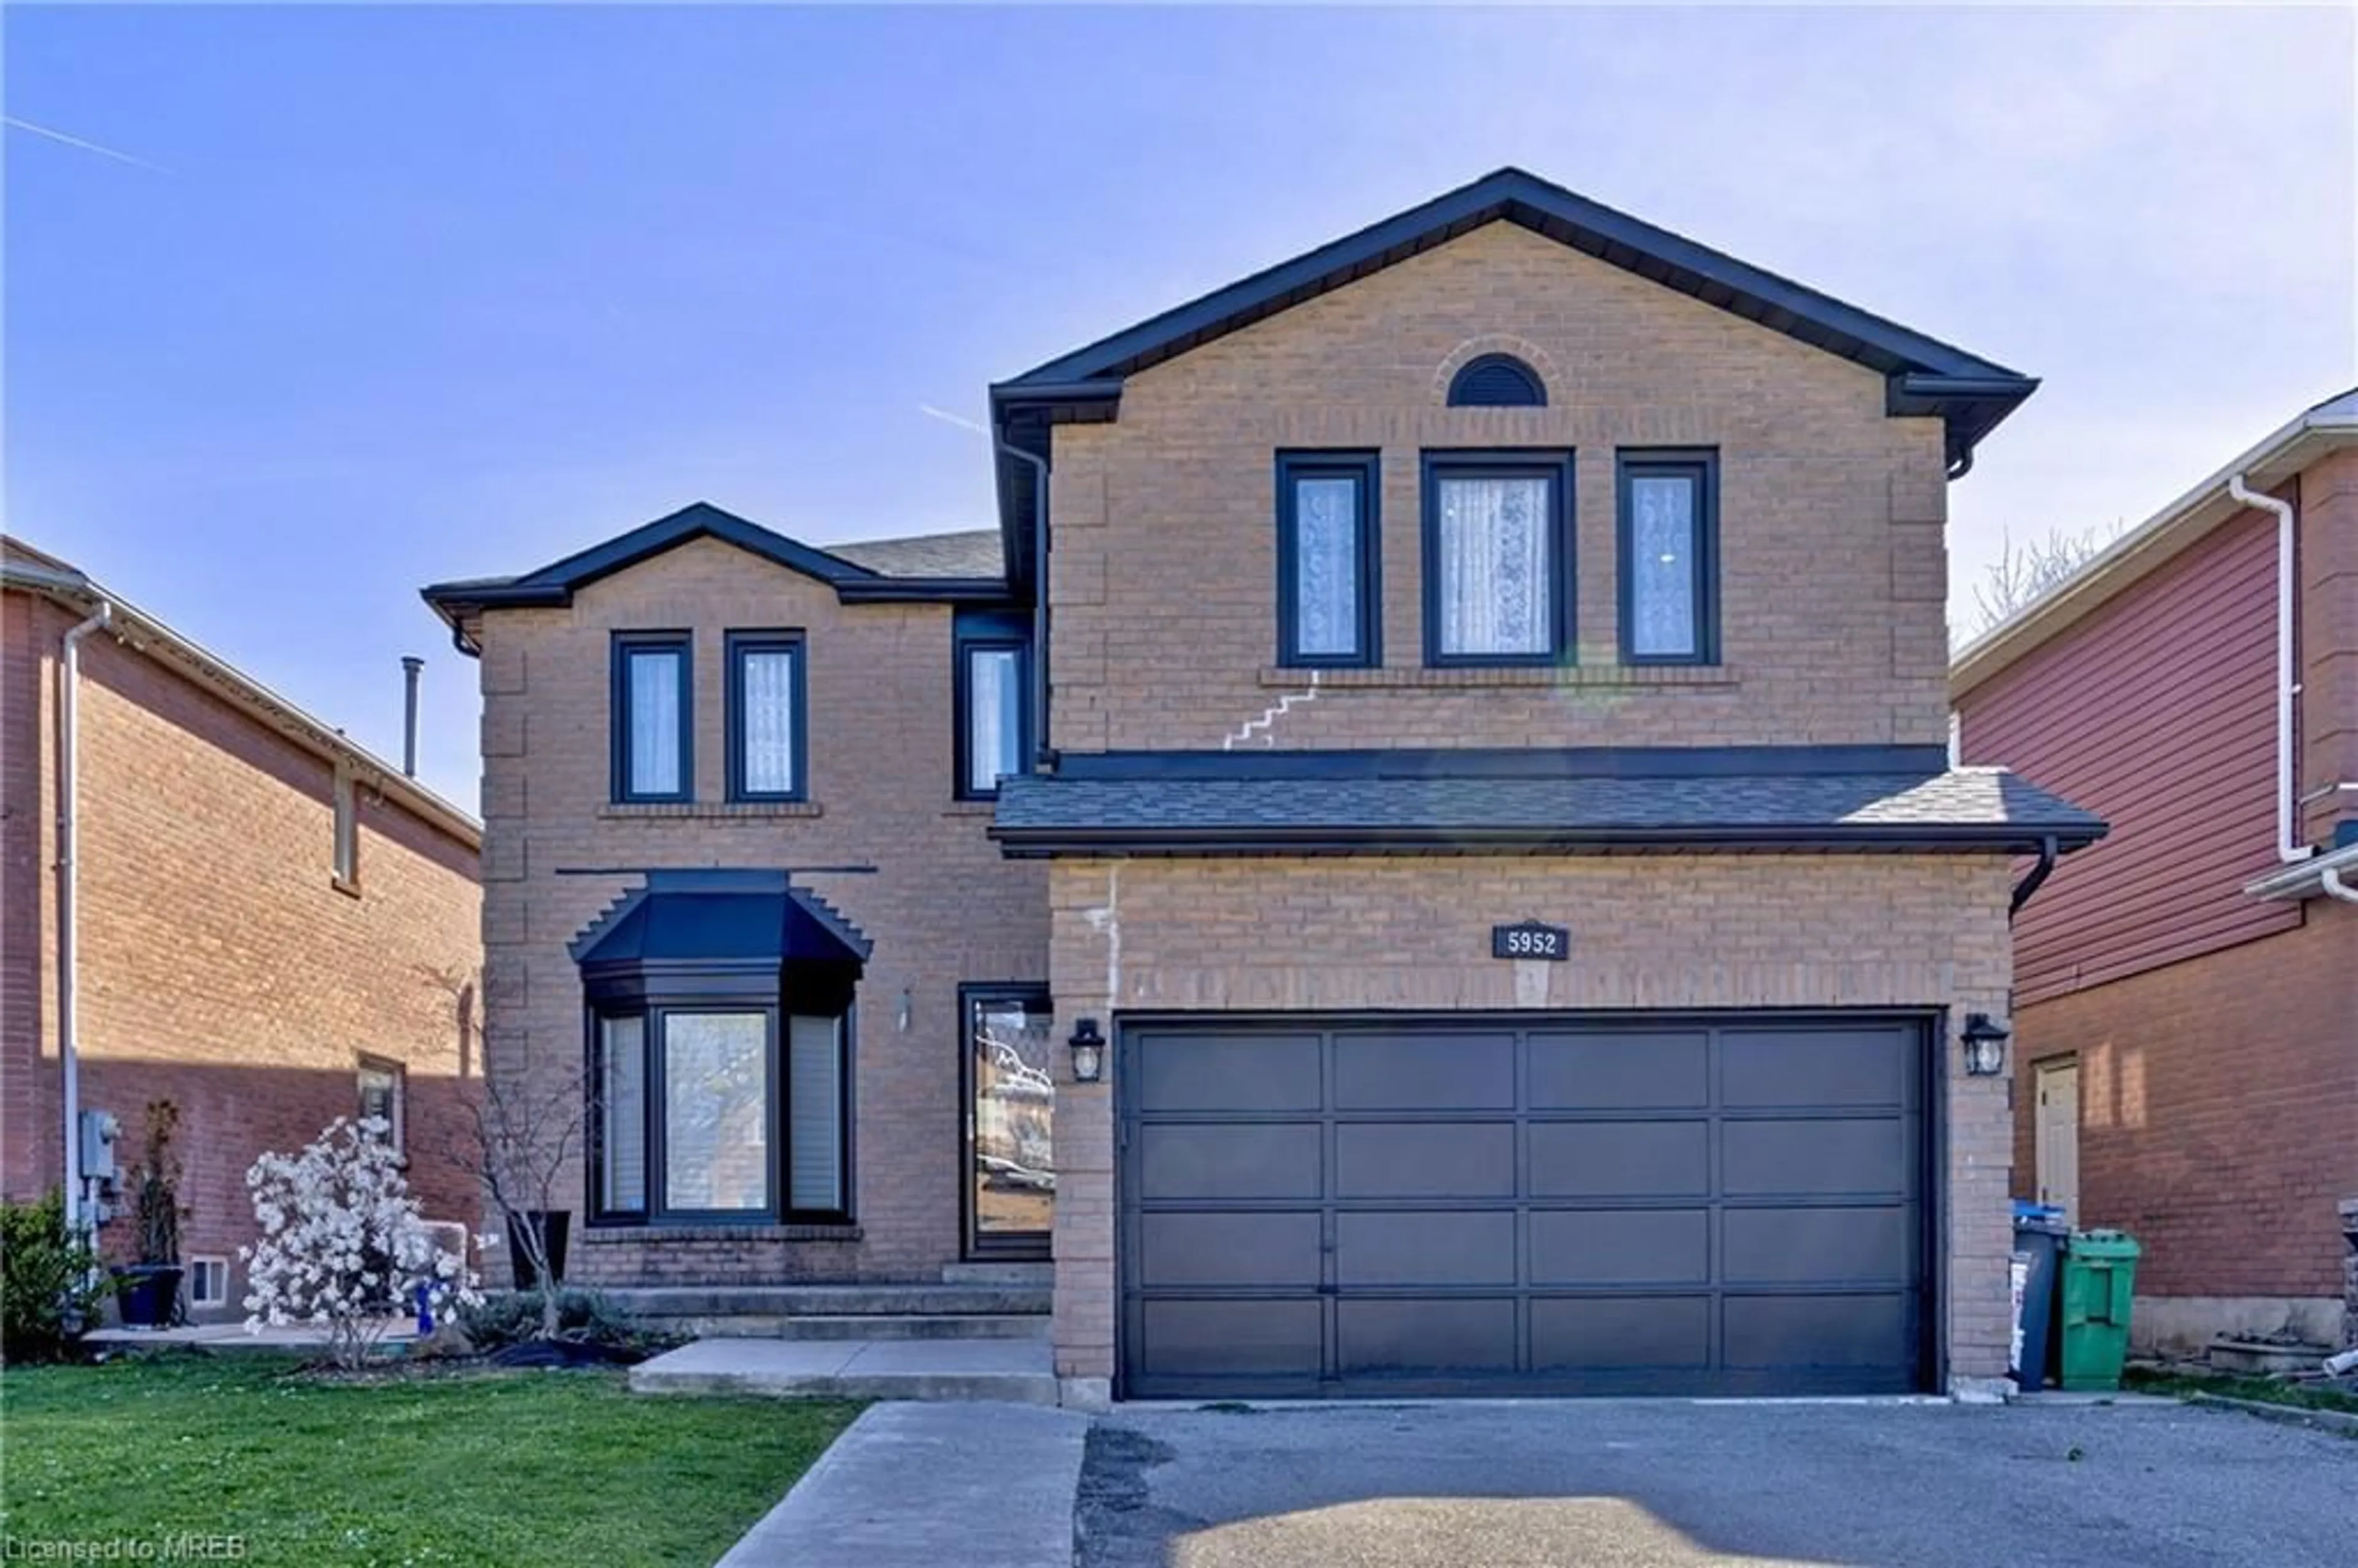 Home with brick exterior material for 5952 Grossbeak Dr, Mississauga Ontario L5N 6B3